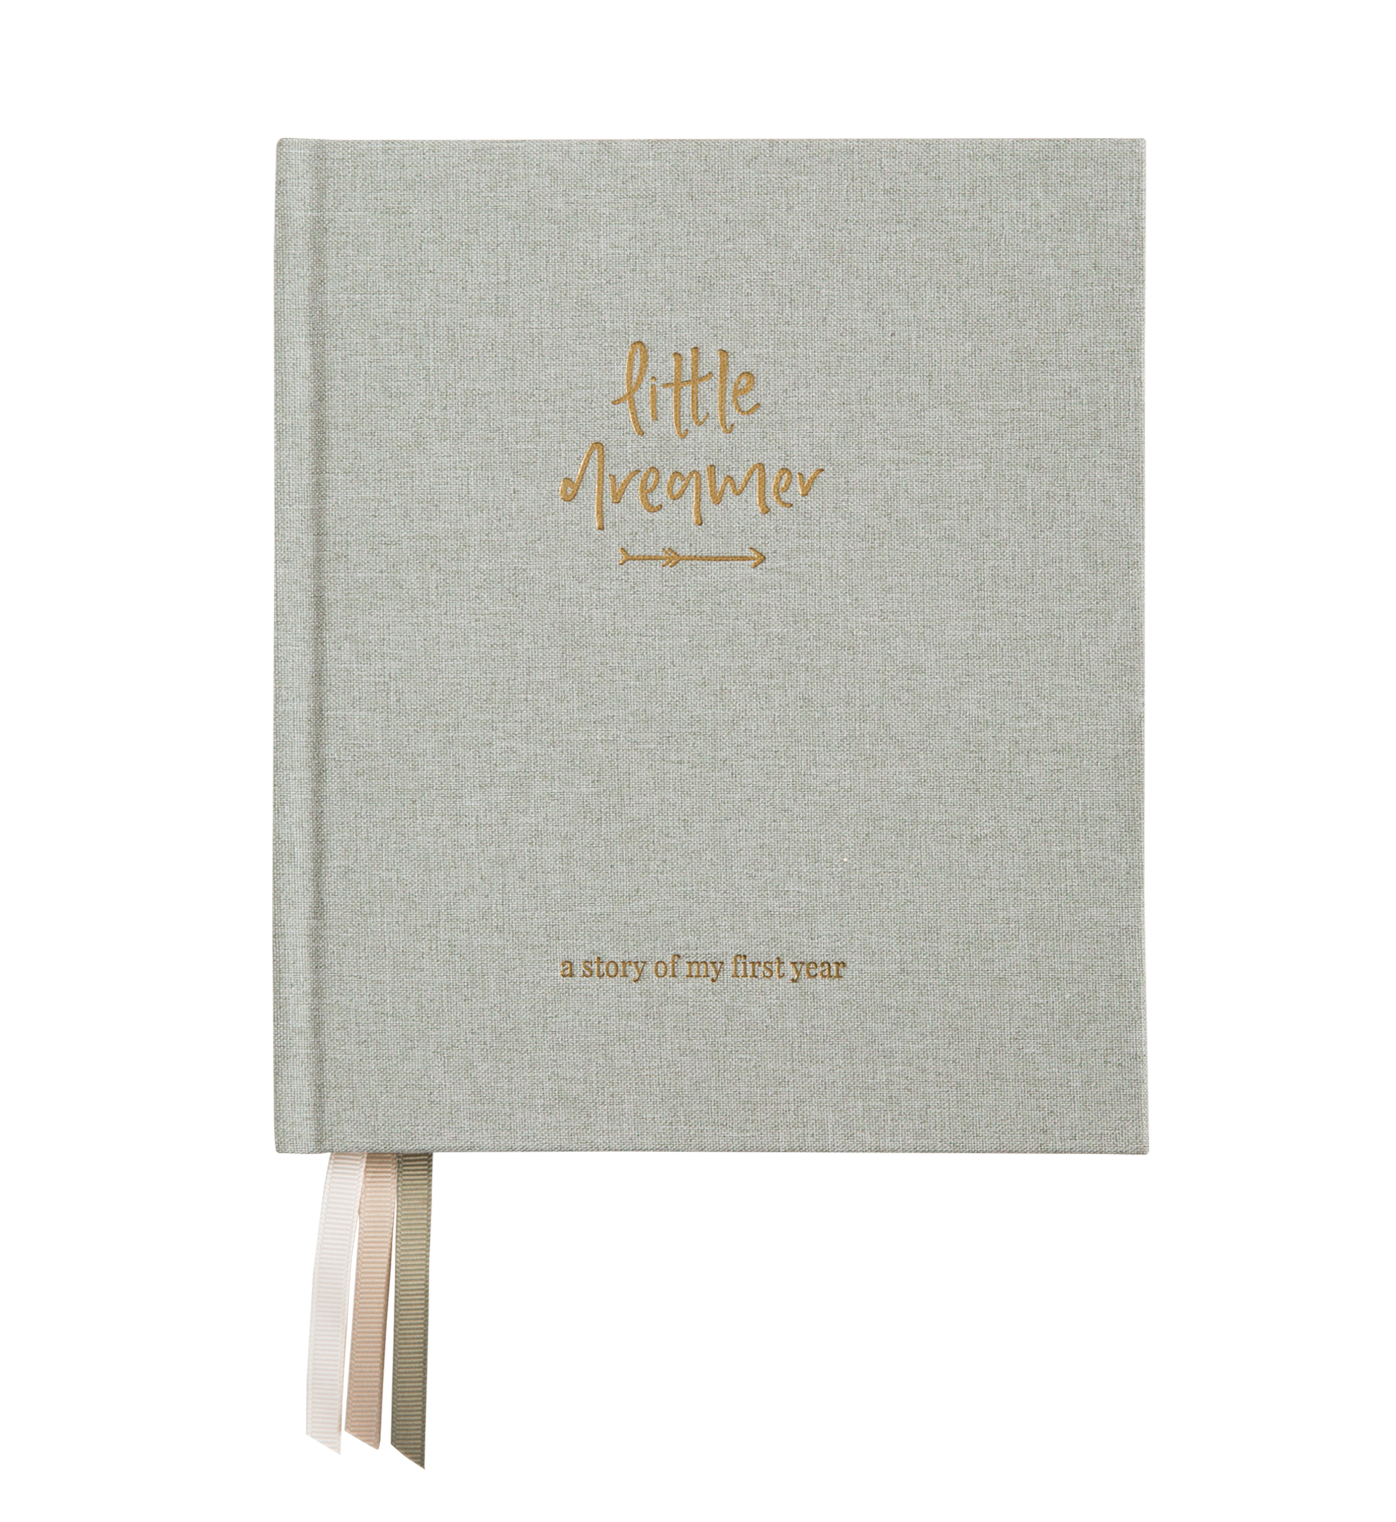 A keepsake to be passed down to your little dreamer. A memento to imprint those moments easily forgotten in the fog of early parenthood. A journal of the milestones and memories, the hilarious and heart-warming. A time capsule of your little one’s history, heritage and home.